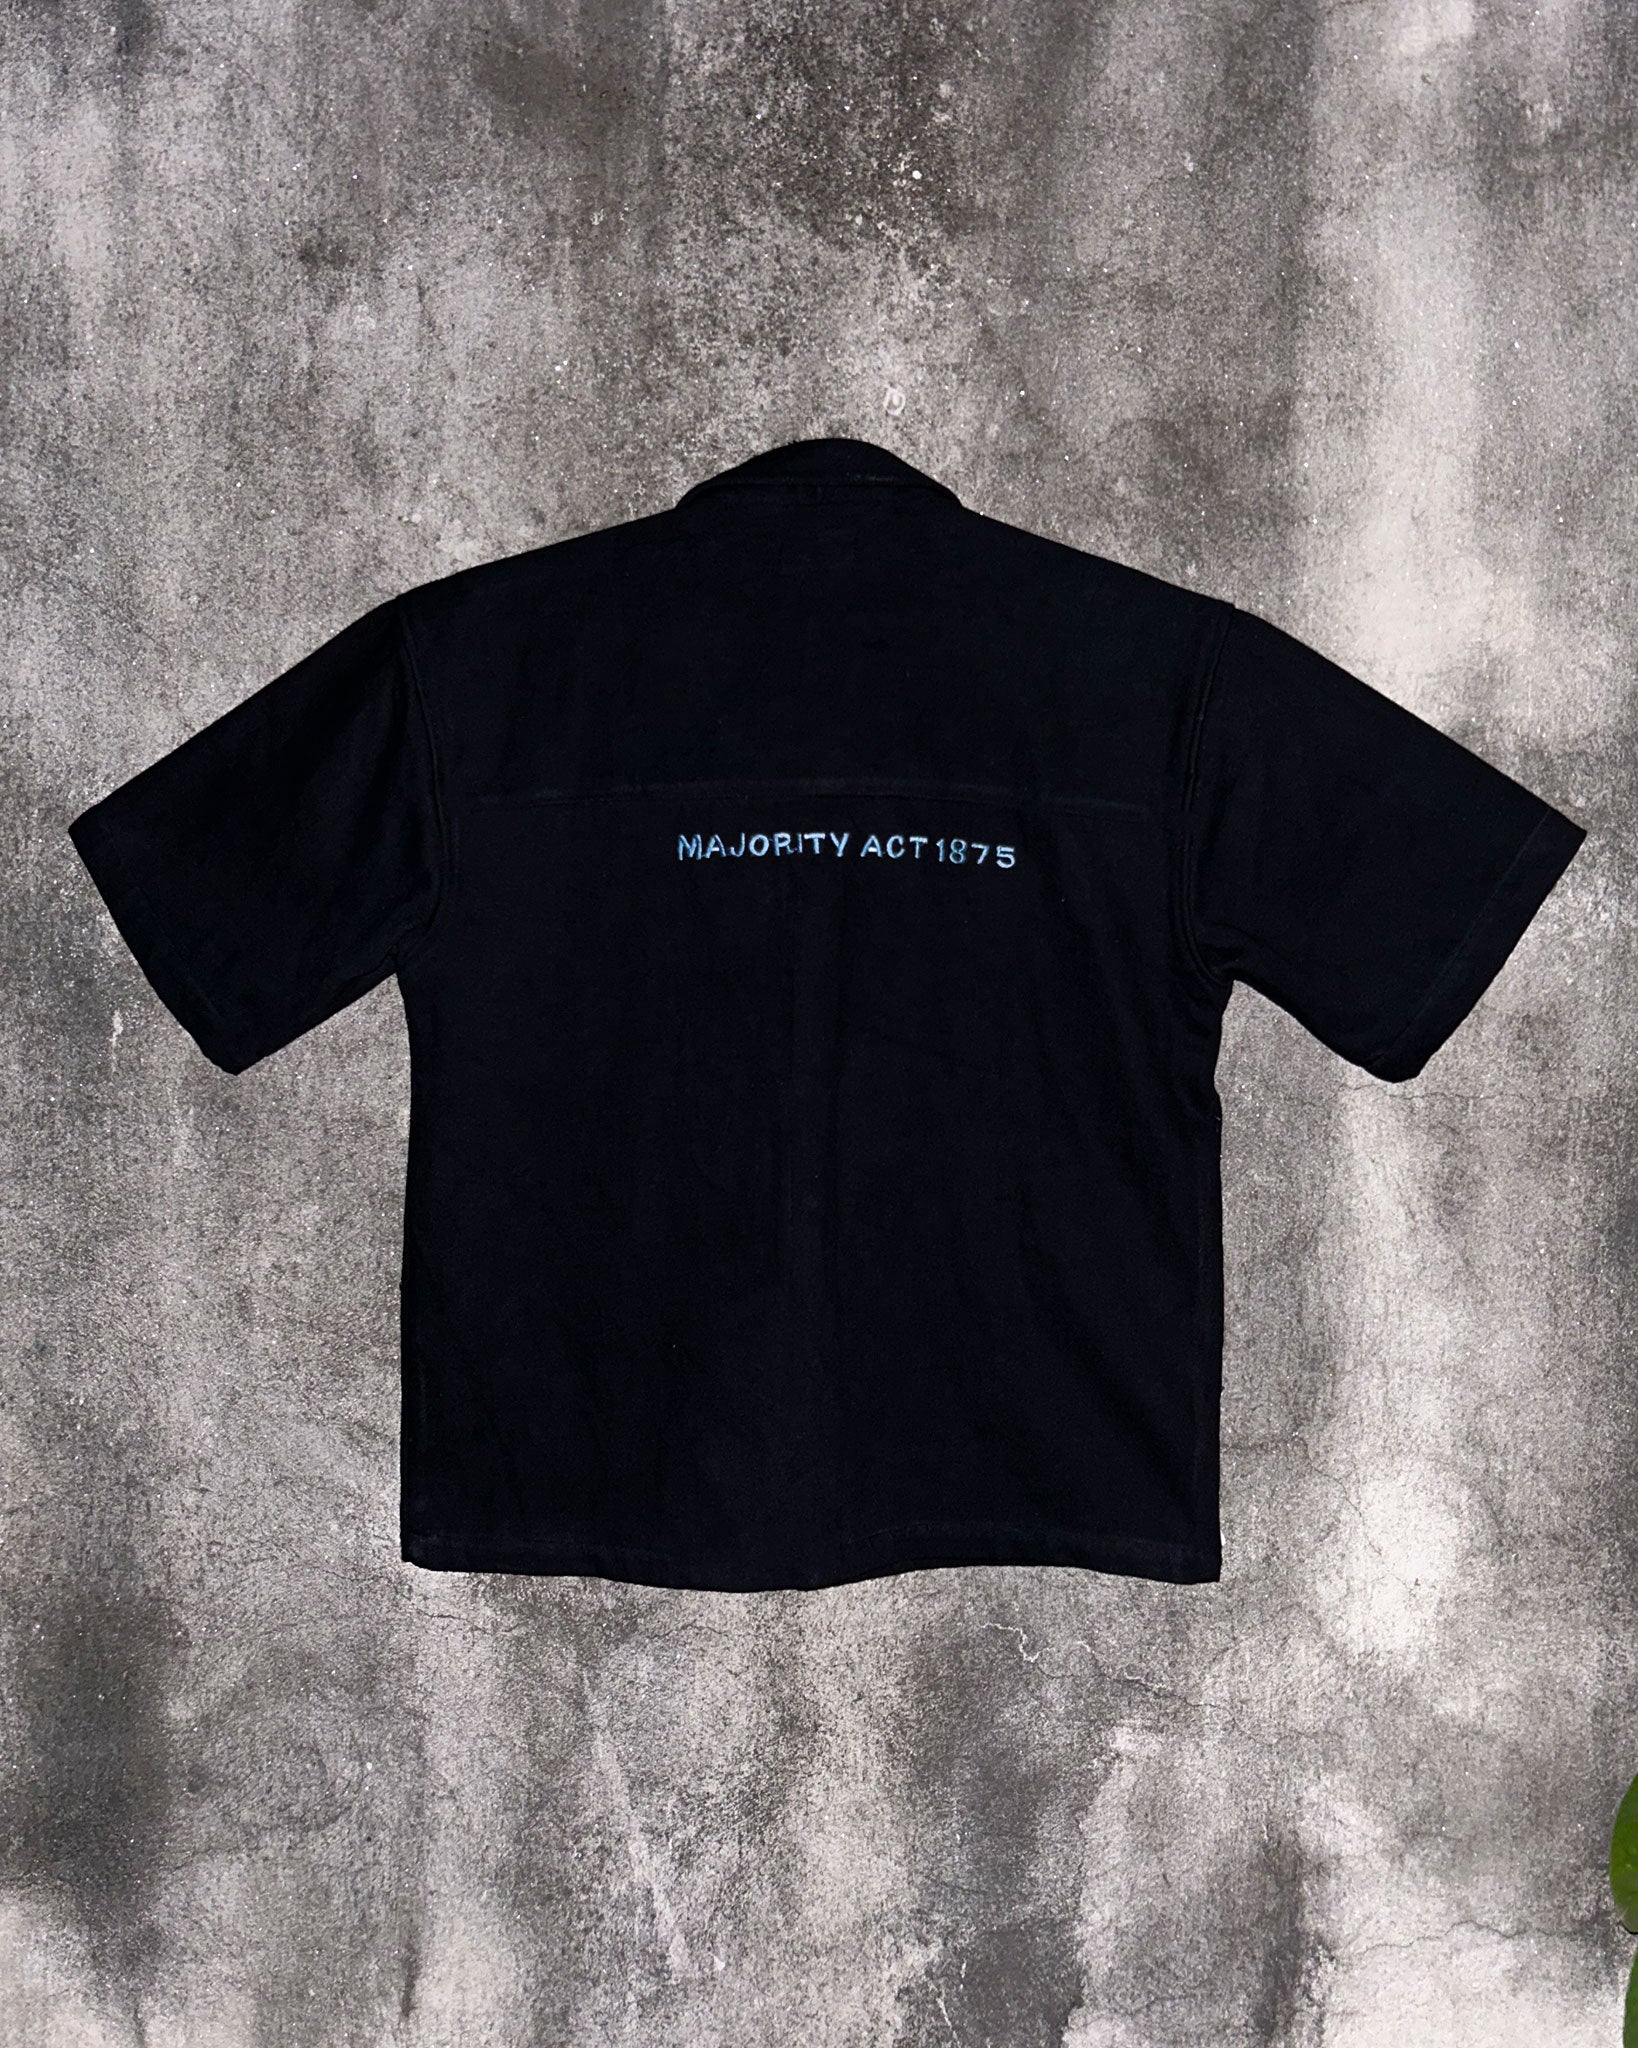 Majority Act Black Shirt with Embroidered Text Back